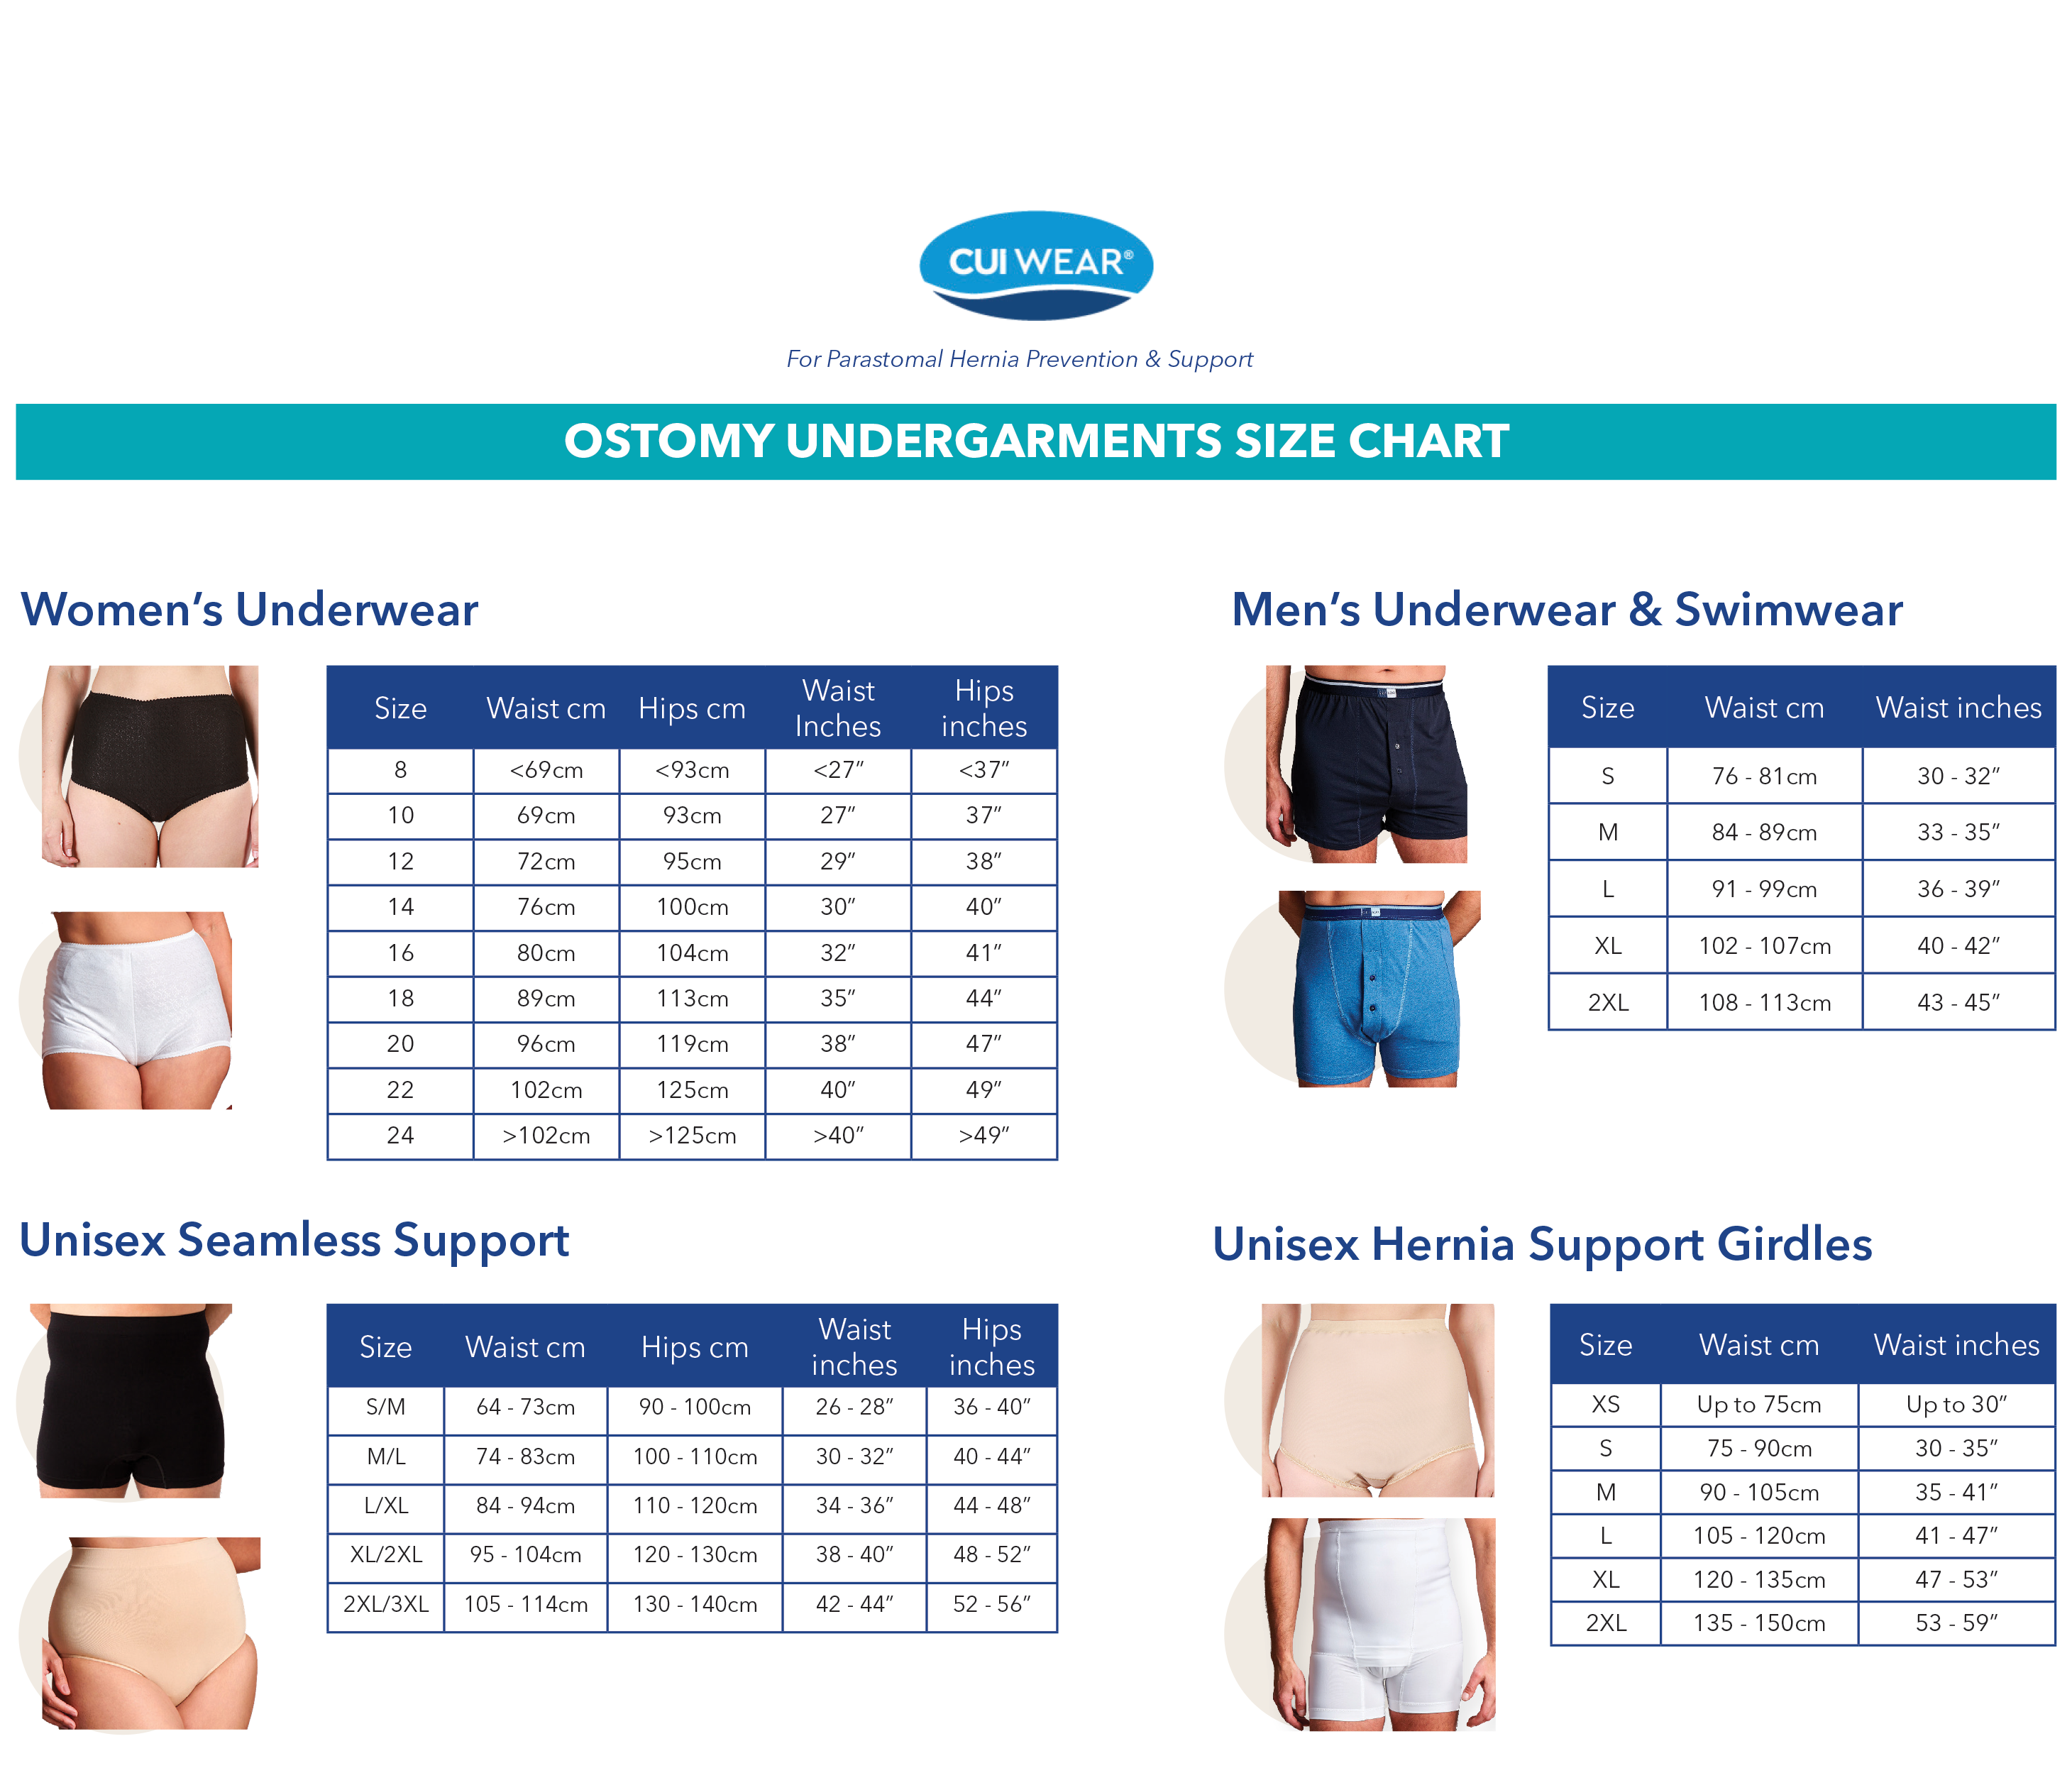 CUI Mens Hernia Low Waist Support Girdle With Legs - 1 each, SMALL, BLACK